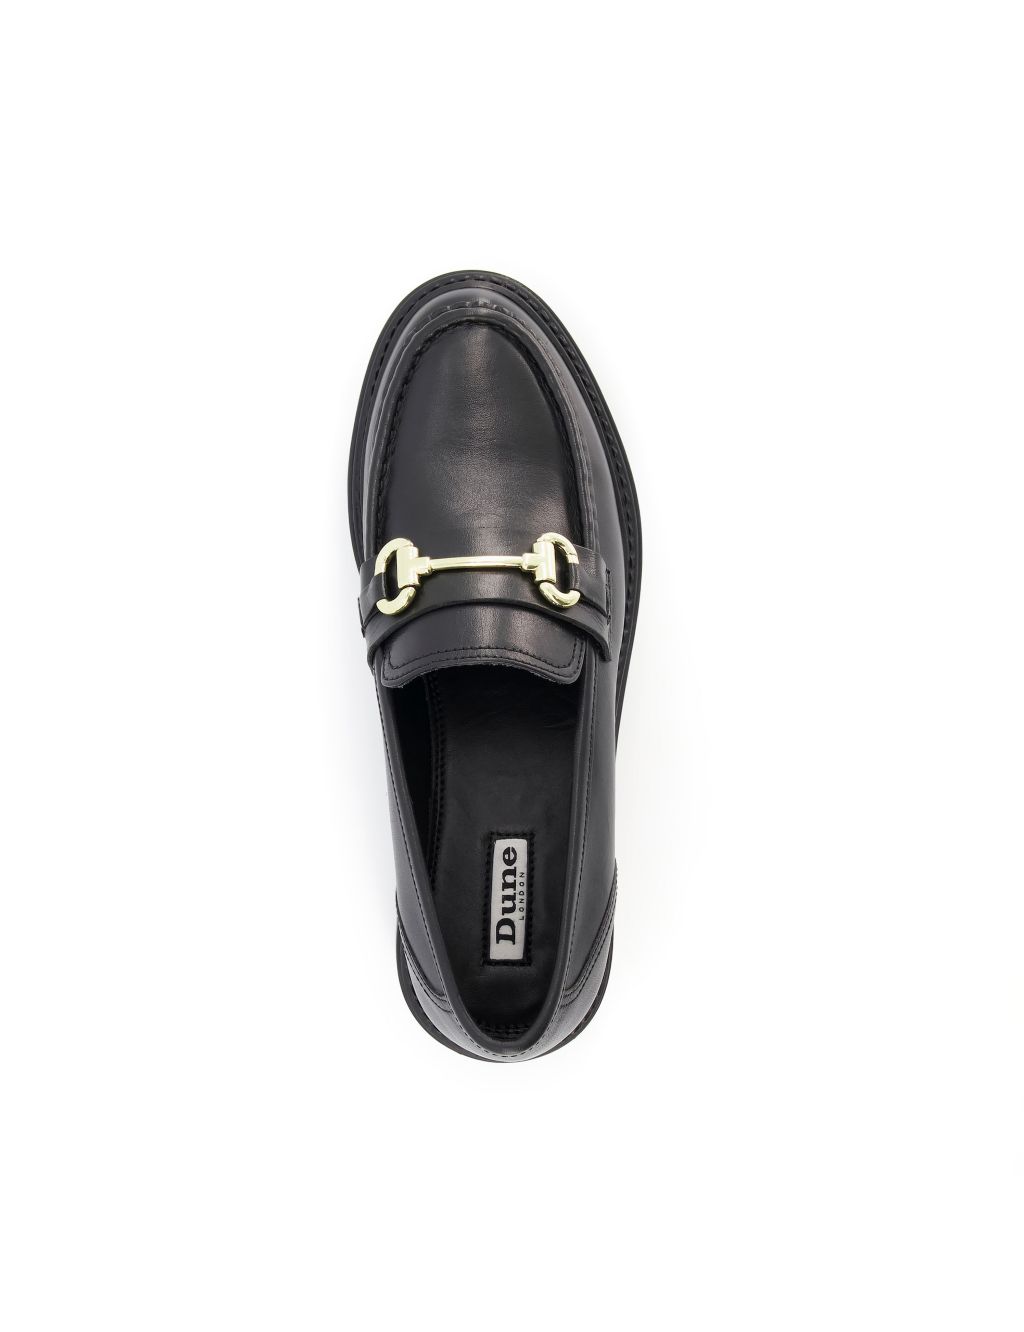 Leather Chunky Bar Flat Loafers image 2